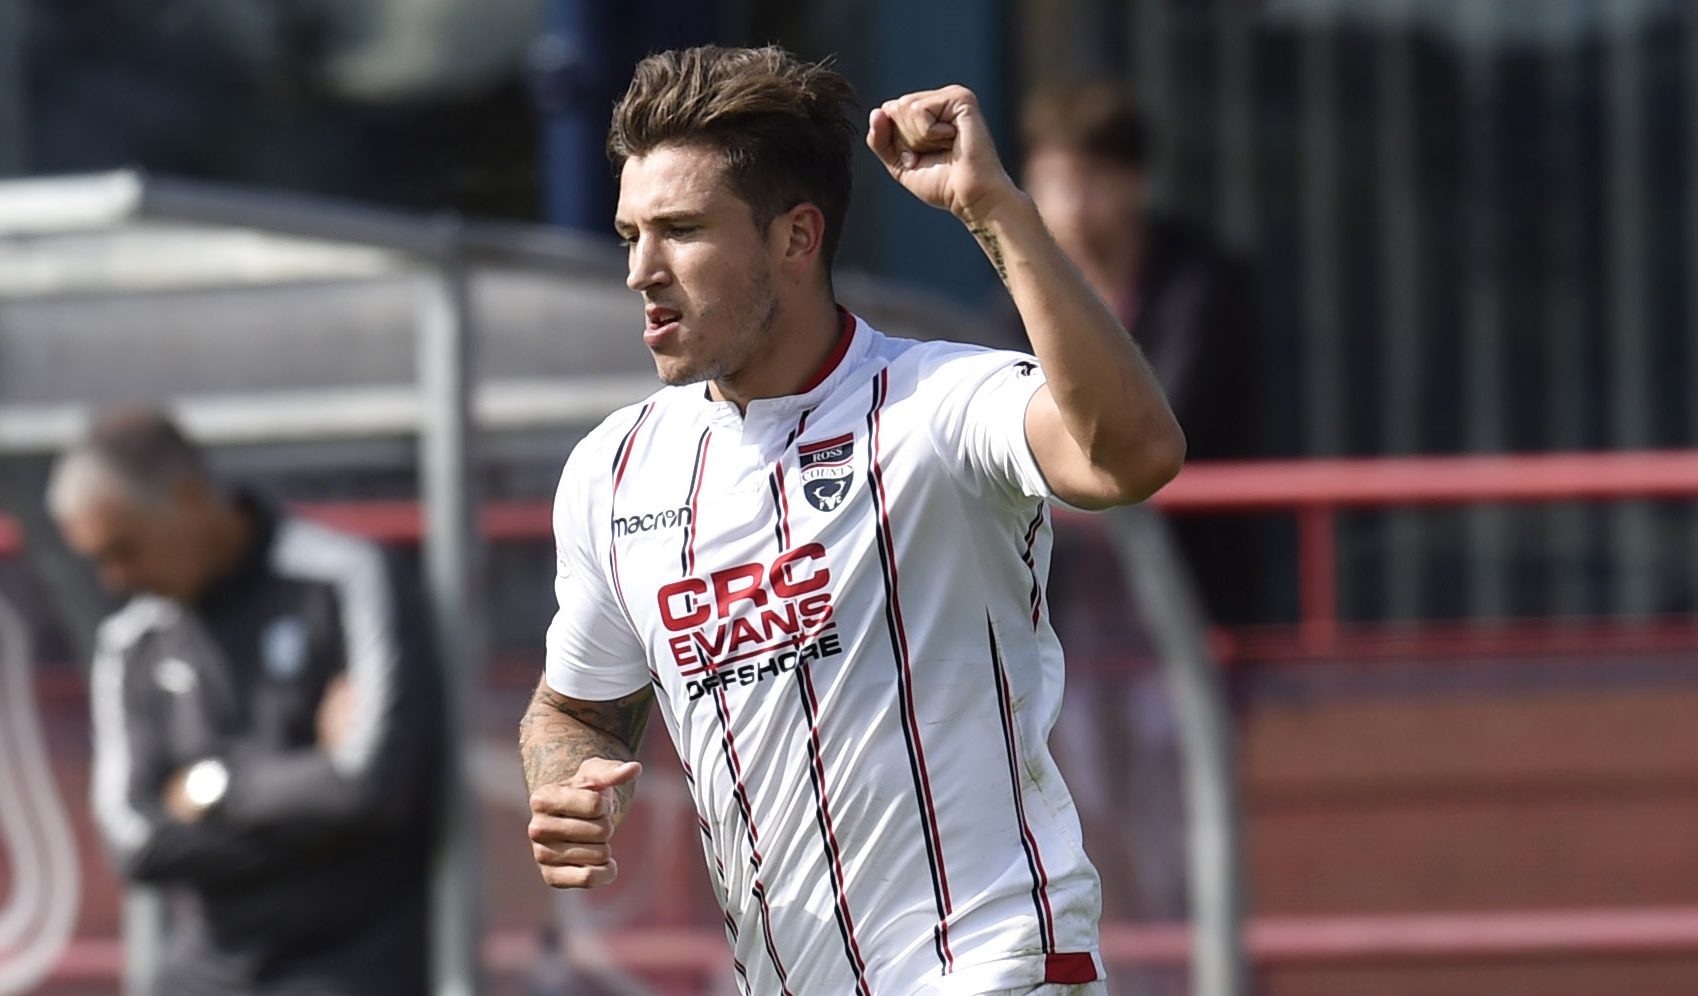 Ross County's Christopher Routis celebrates his goal.